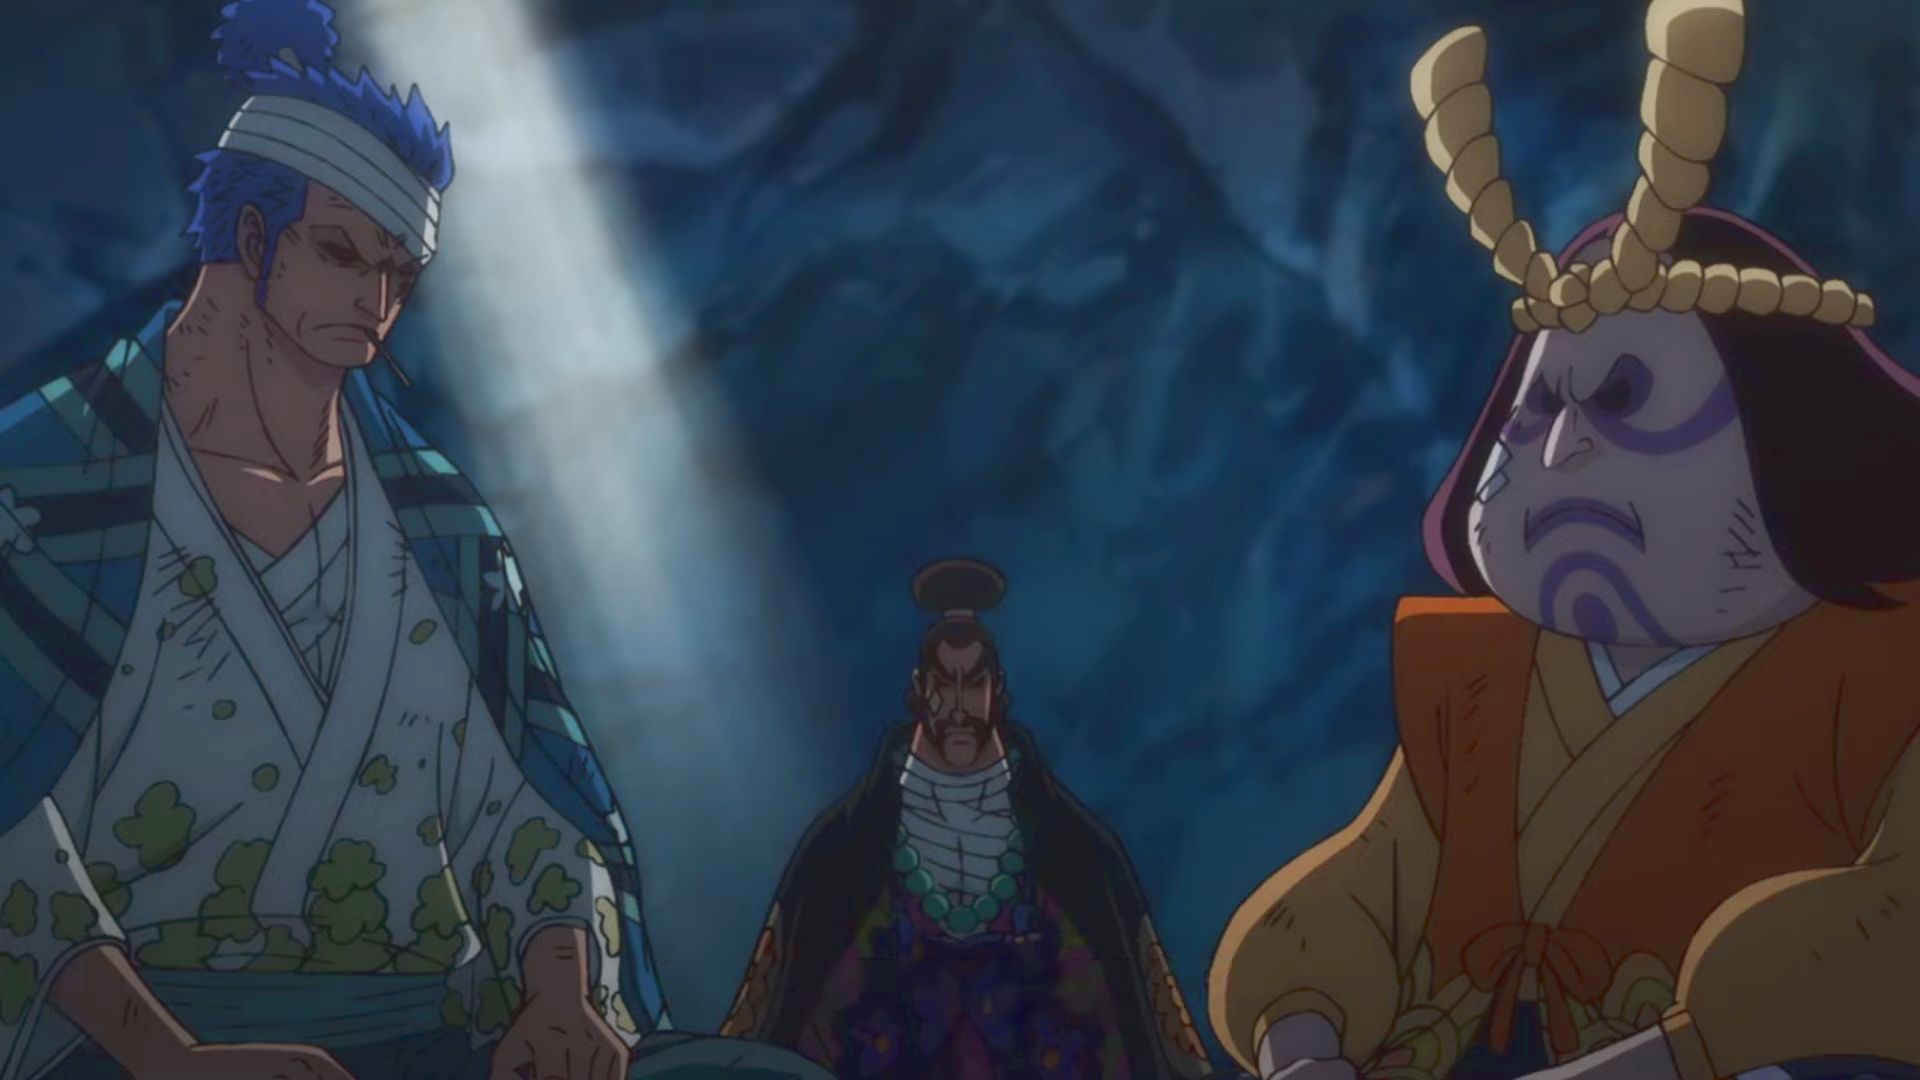 Three bandaged samurai are seen sitting in a cave with their eyes blackened. One with blue hair, one with facepaint, and the other with their hair up in a bun.